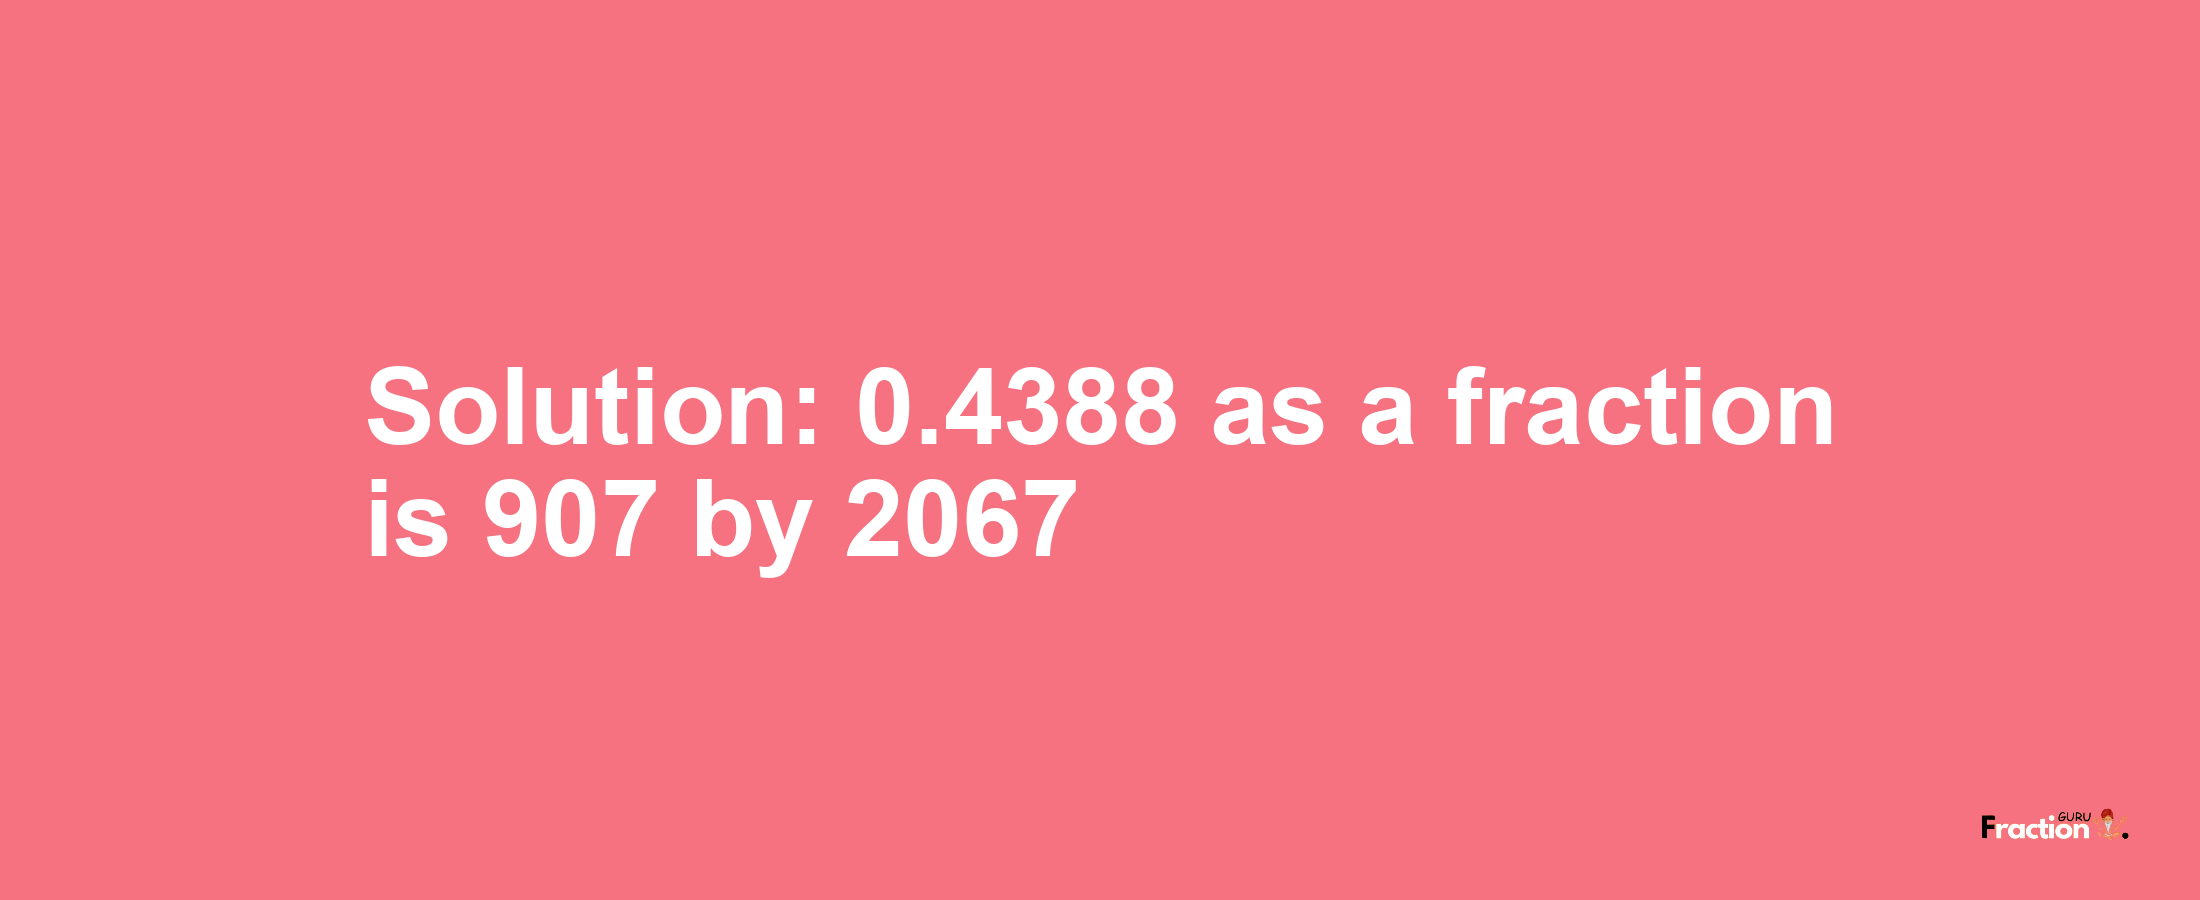 Solution:0.4388 as a fraction is 907/2067